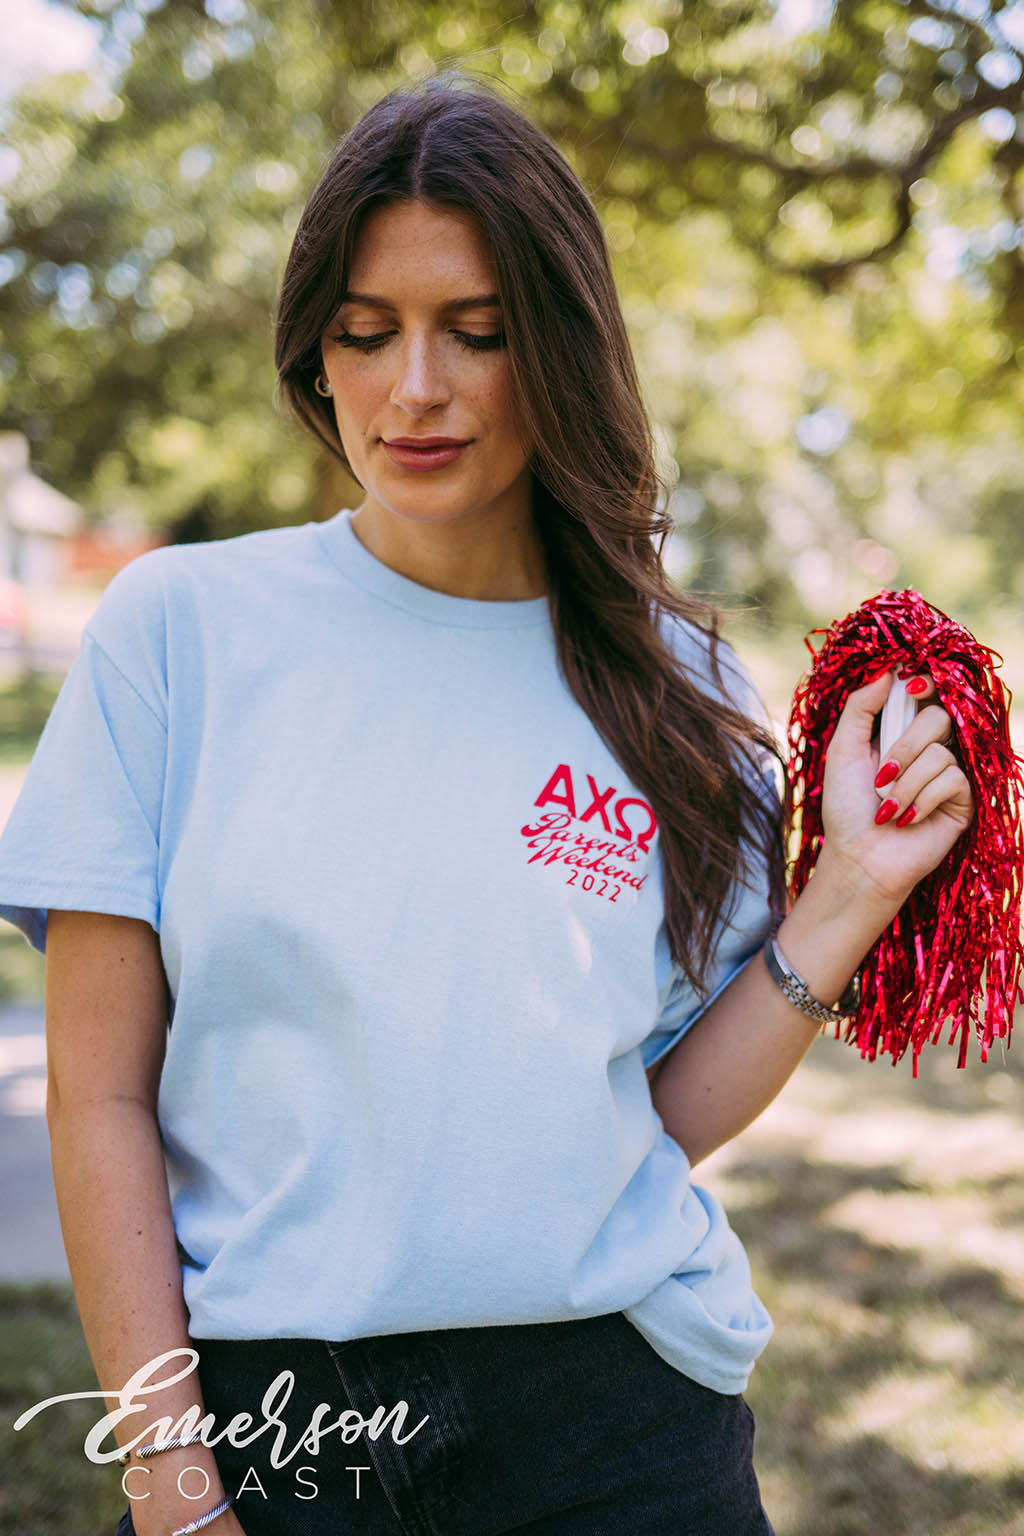 Alpha Chi Omega Greetings From Tampa Parents Weekend Tee